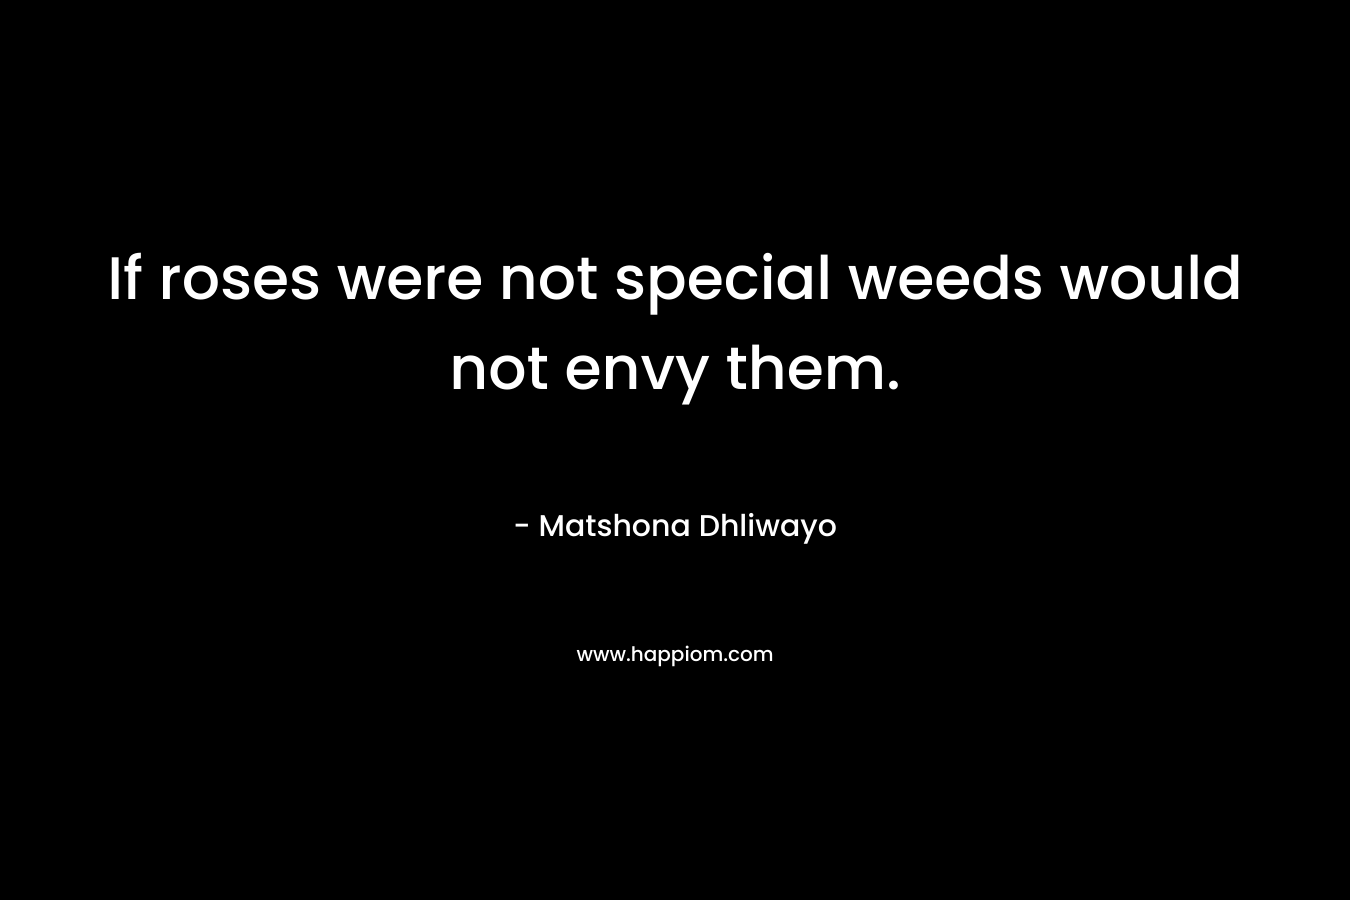 If roses were not special weeds would not envy them. – Matshona Dhliwayo